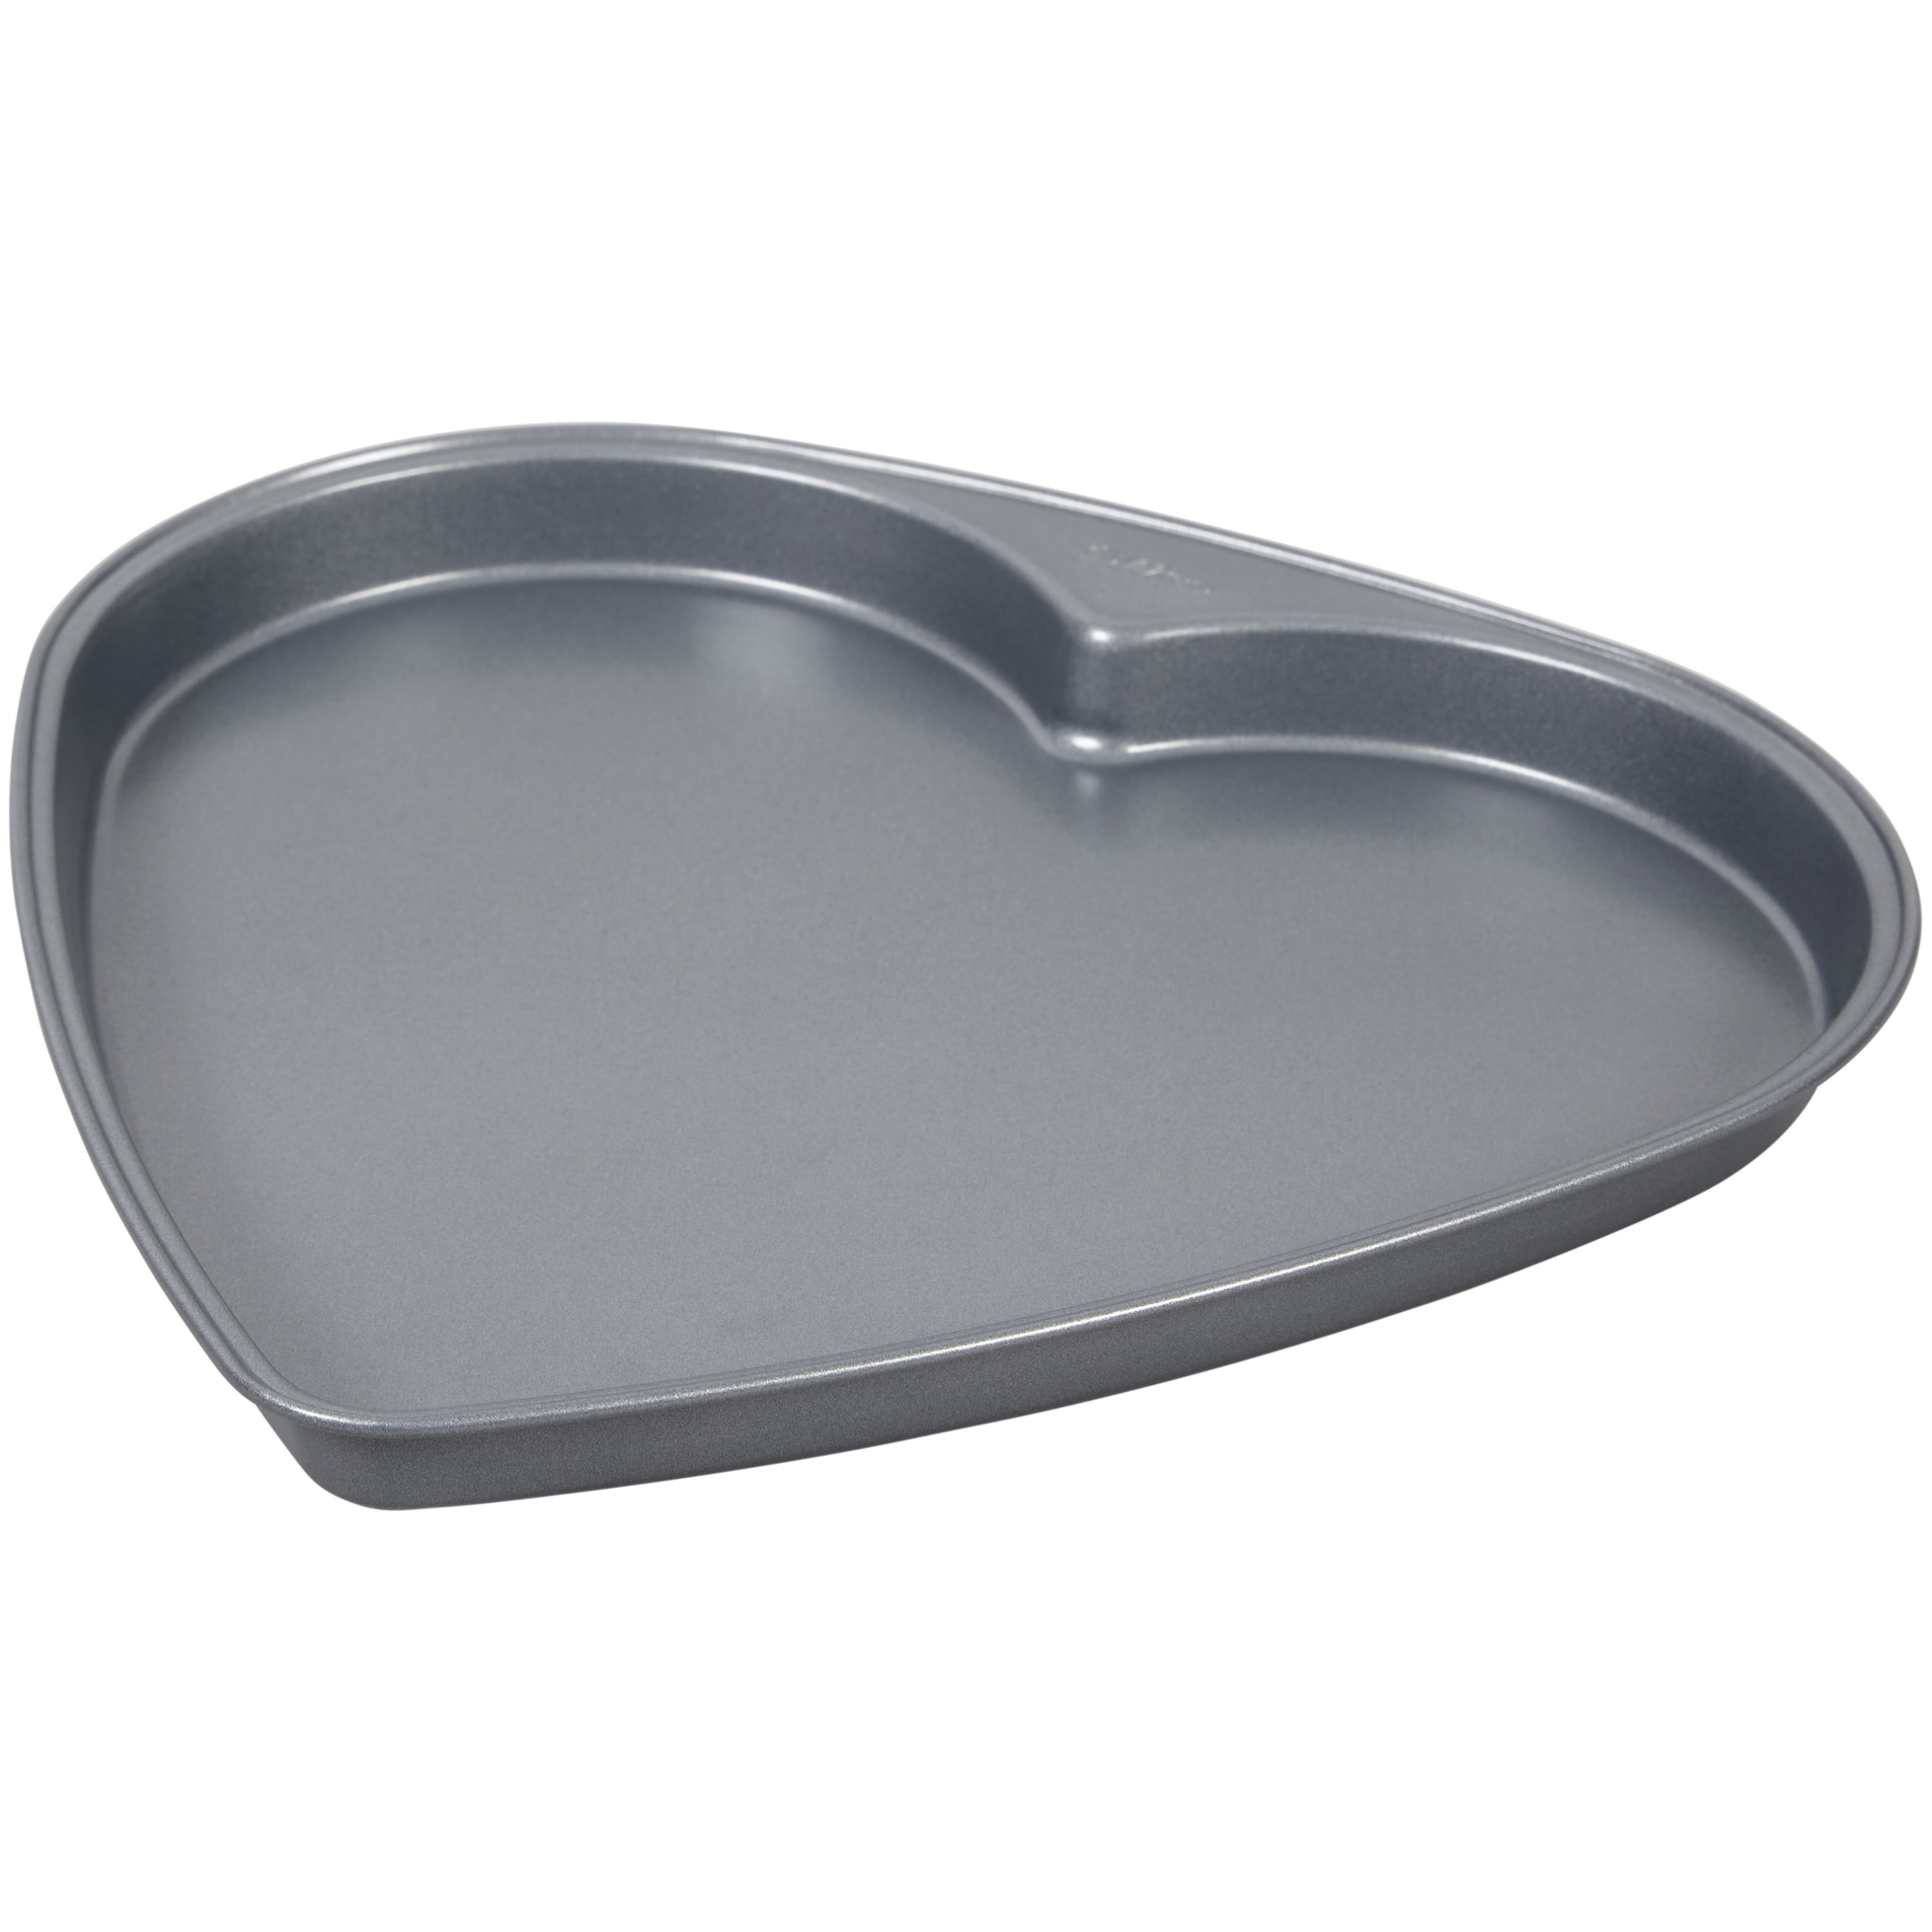 Giant Round Cookie Cake Pan, 11.5-Inch